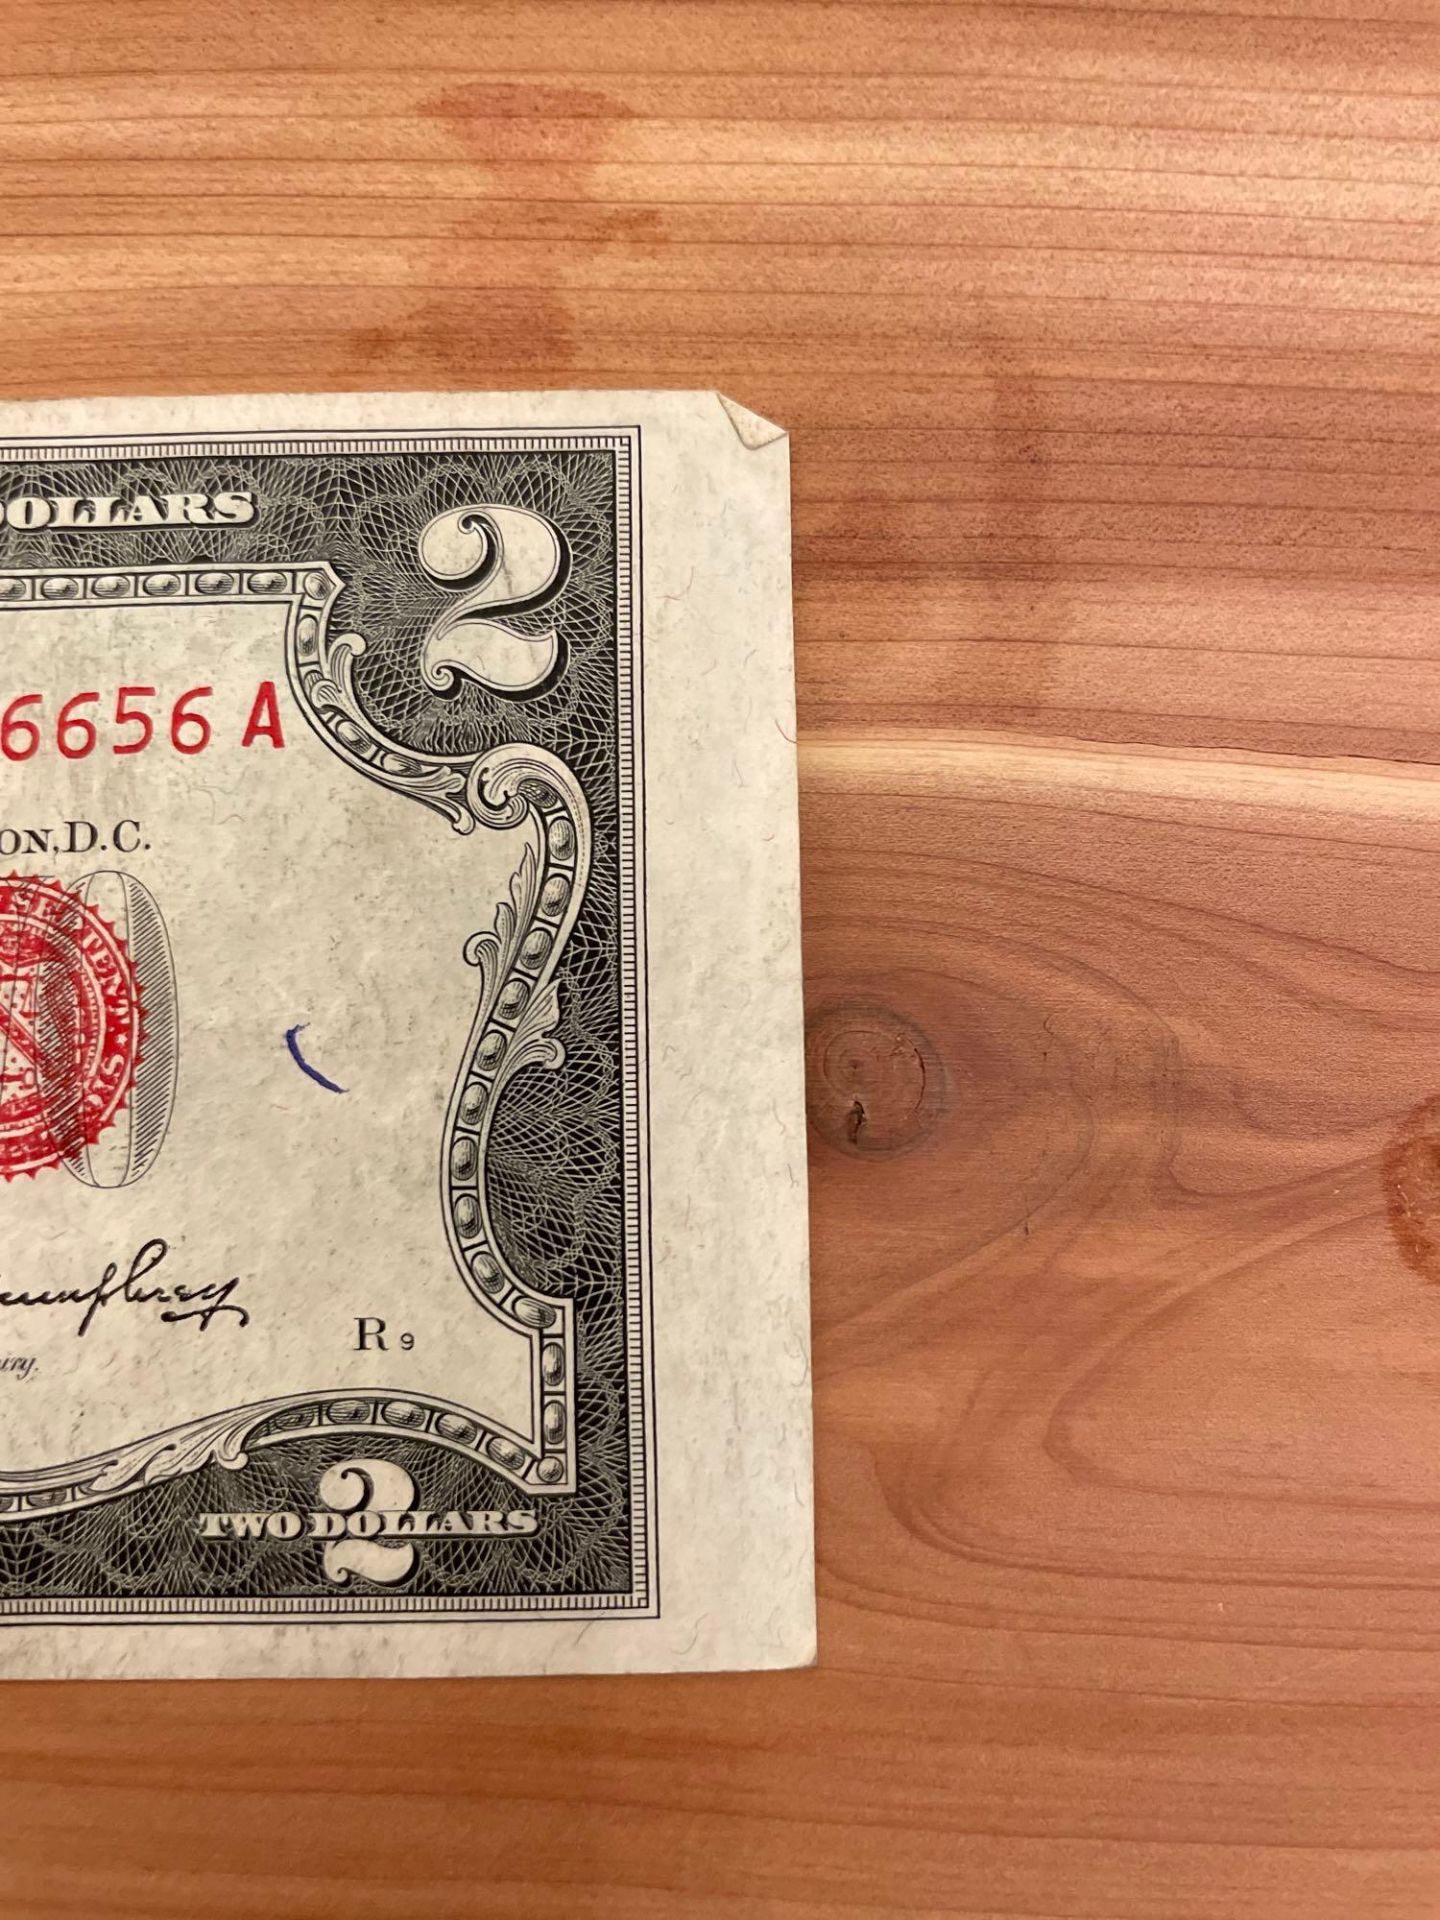 (2) 1953 $ Red Seal Notes (Note with cutting error) - Image 3 of 4